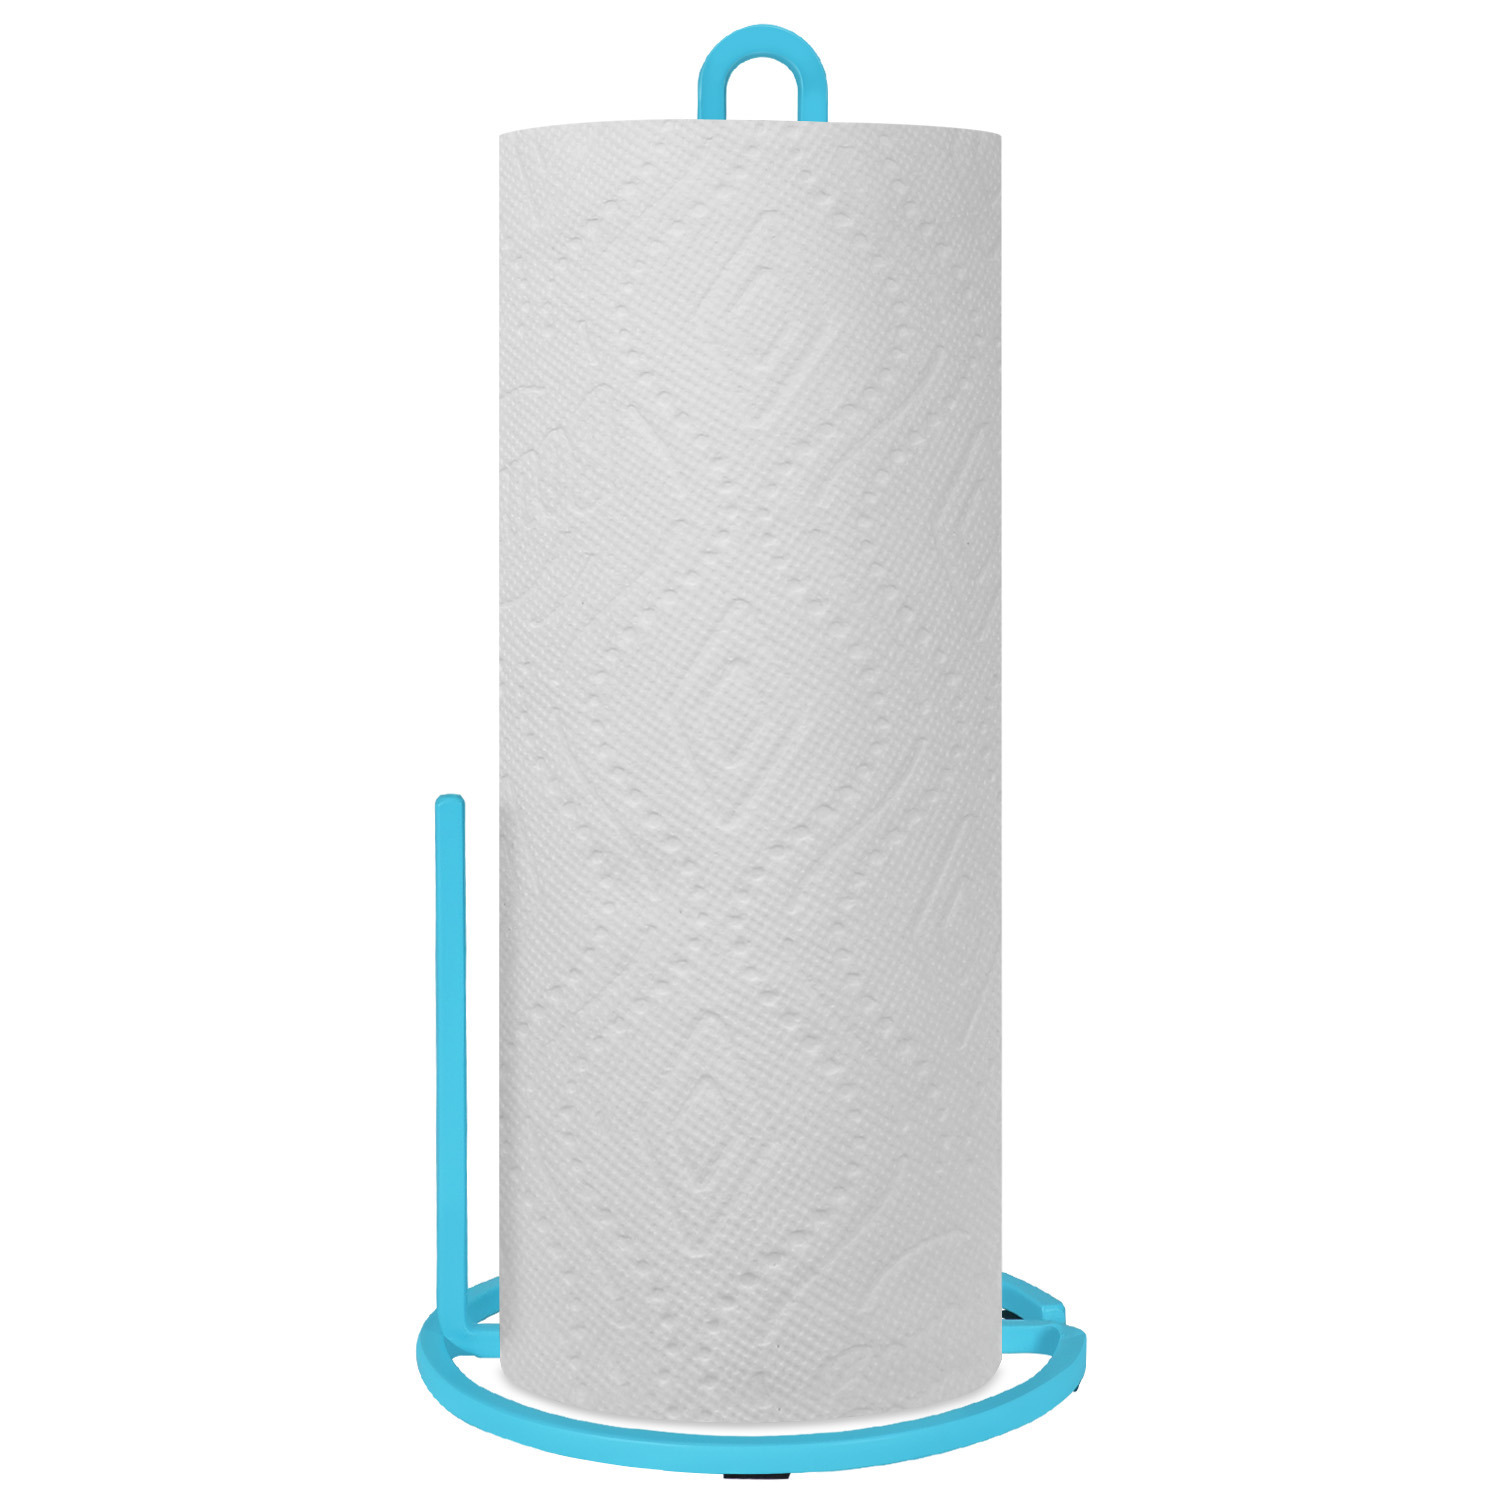 Turquoise square modern paper towel holder 